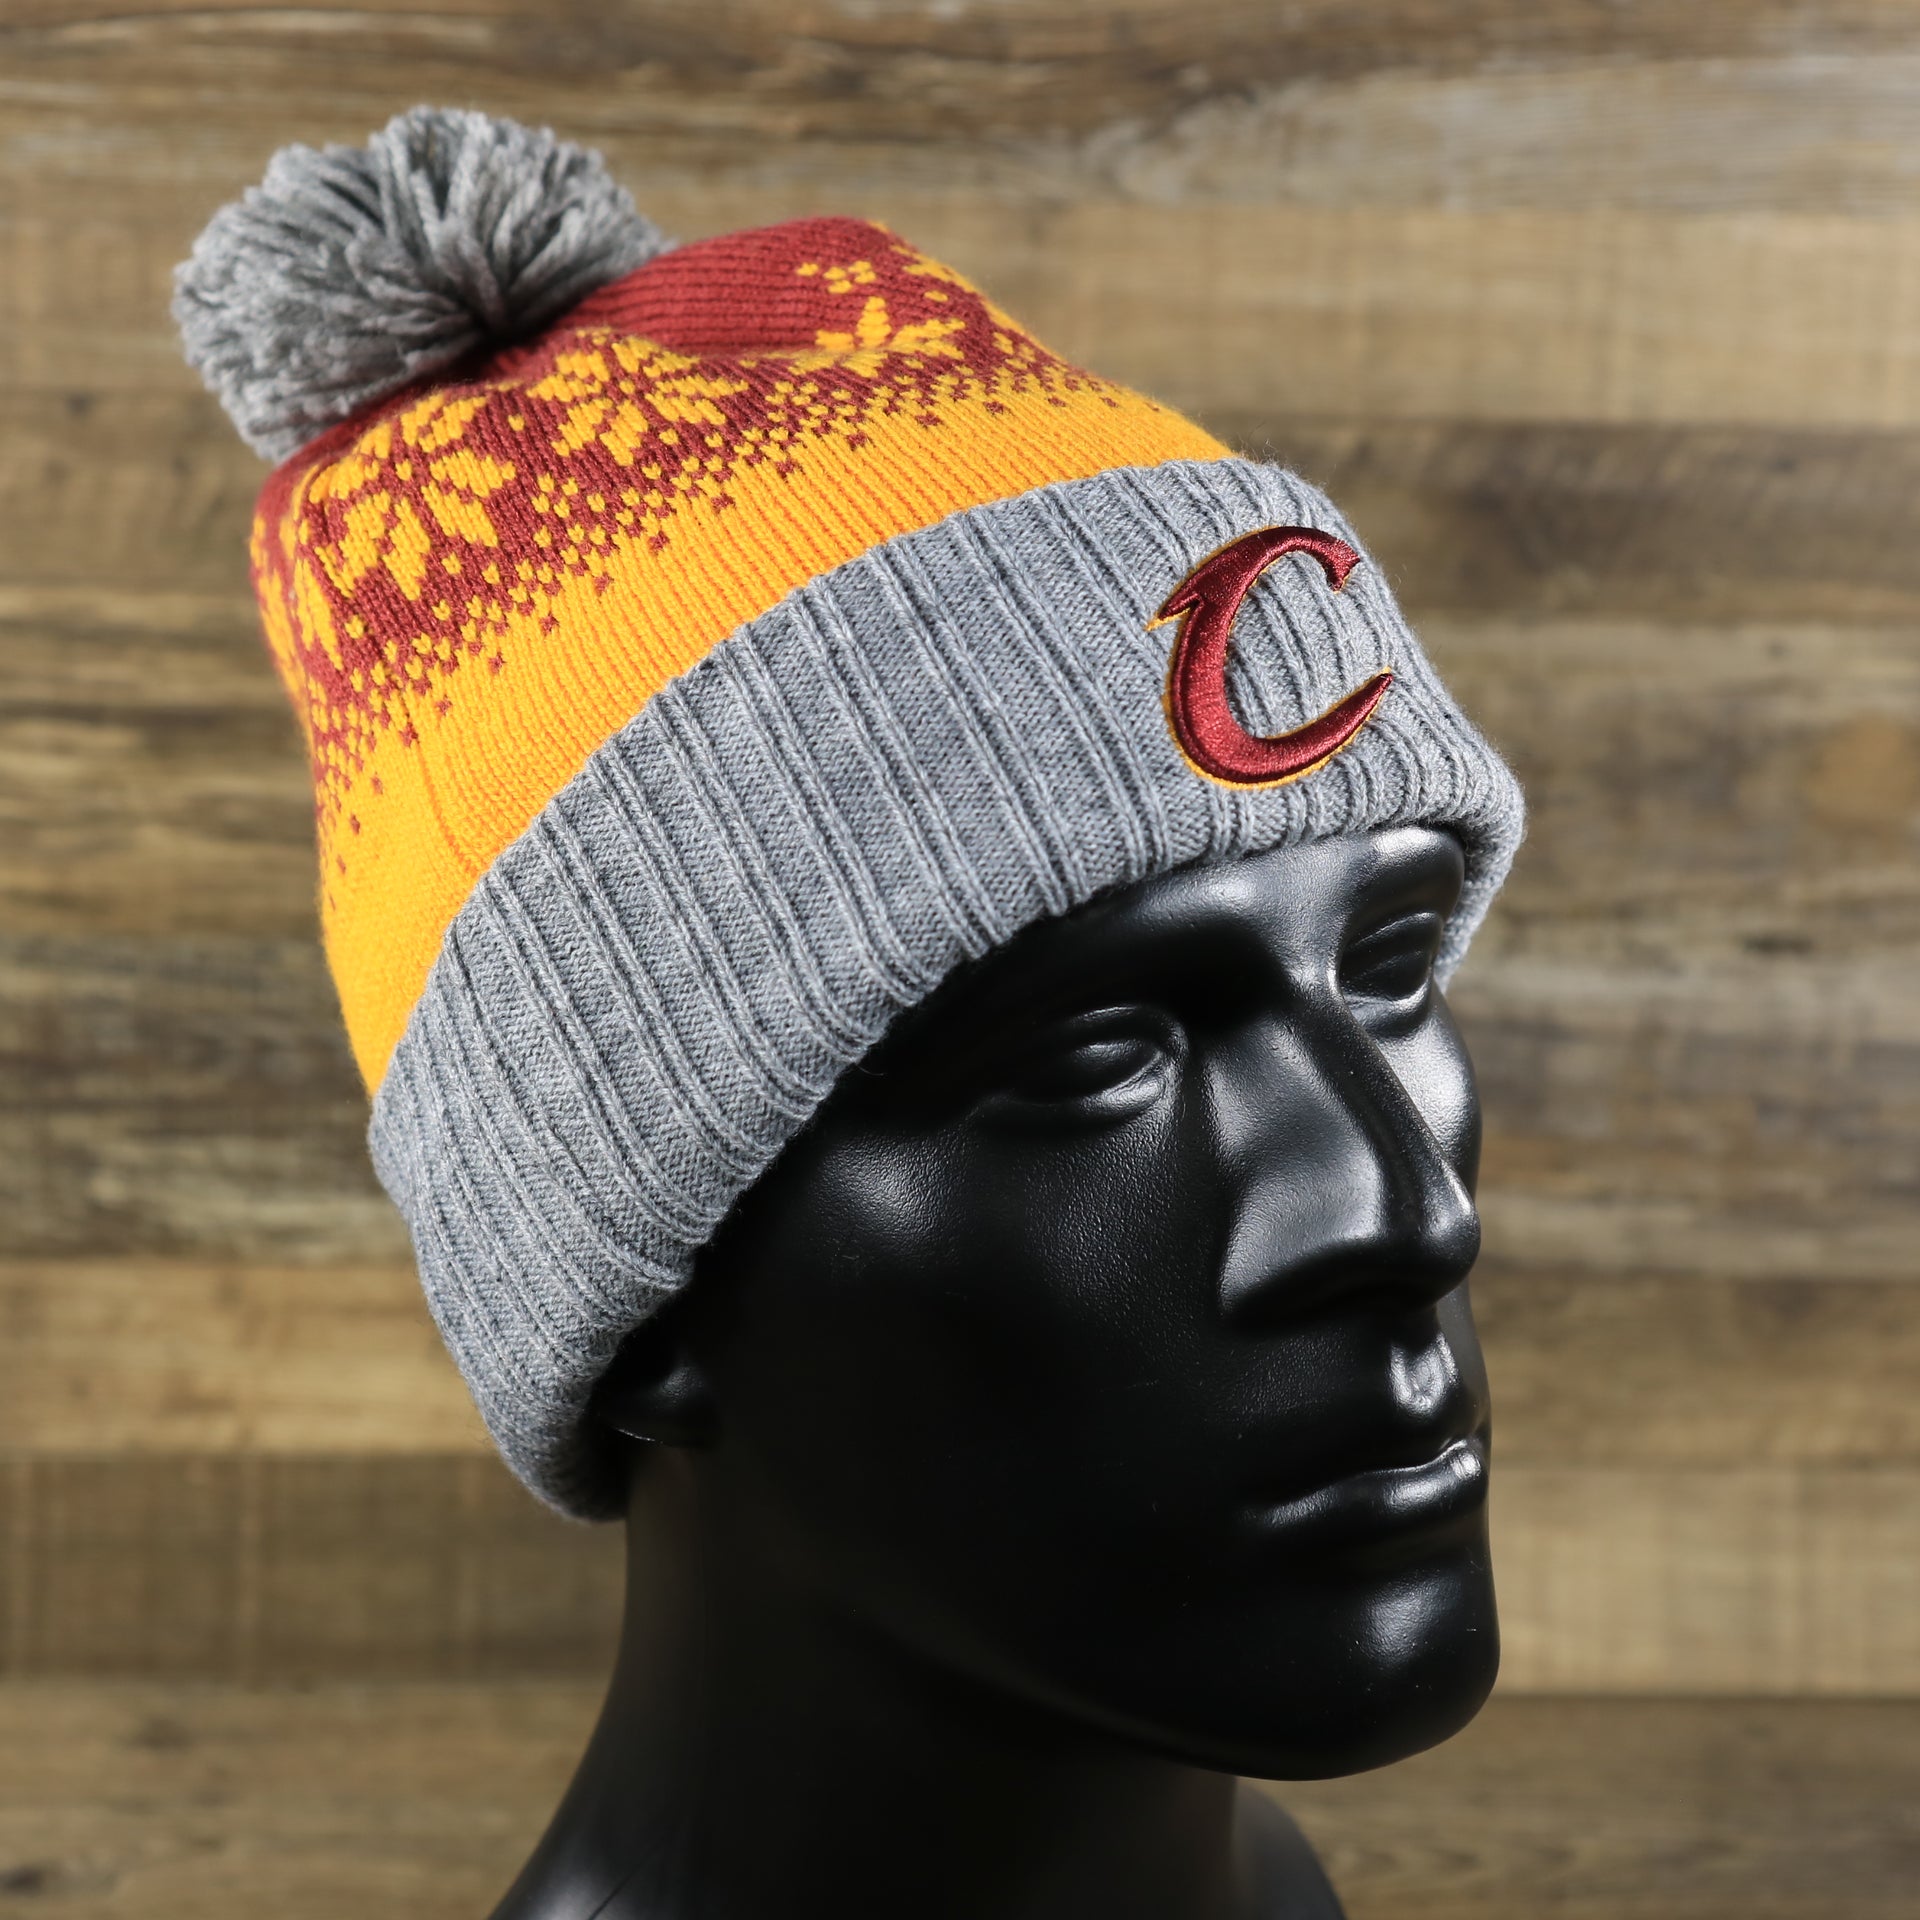 Cleveland Cavaliers Arctic Snowflake Ugly Sweater Pattern Cuffed Beanie With Pom Pom | Yellow, Maroon, and Gray Winter Beanie